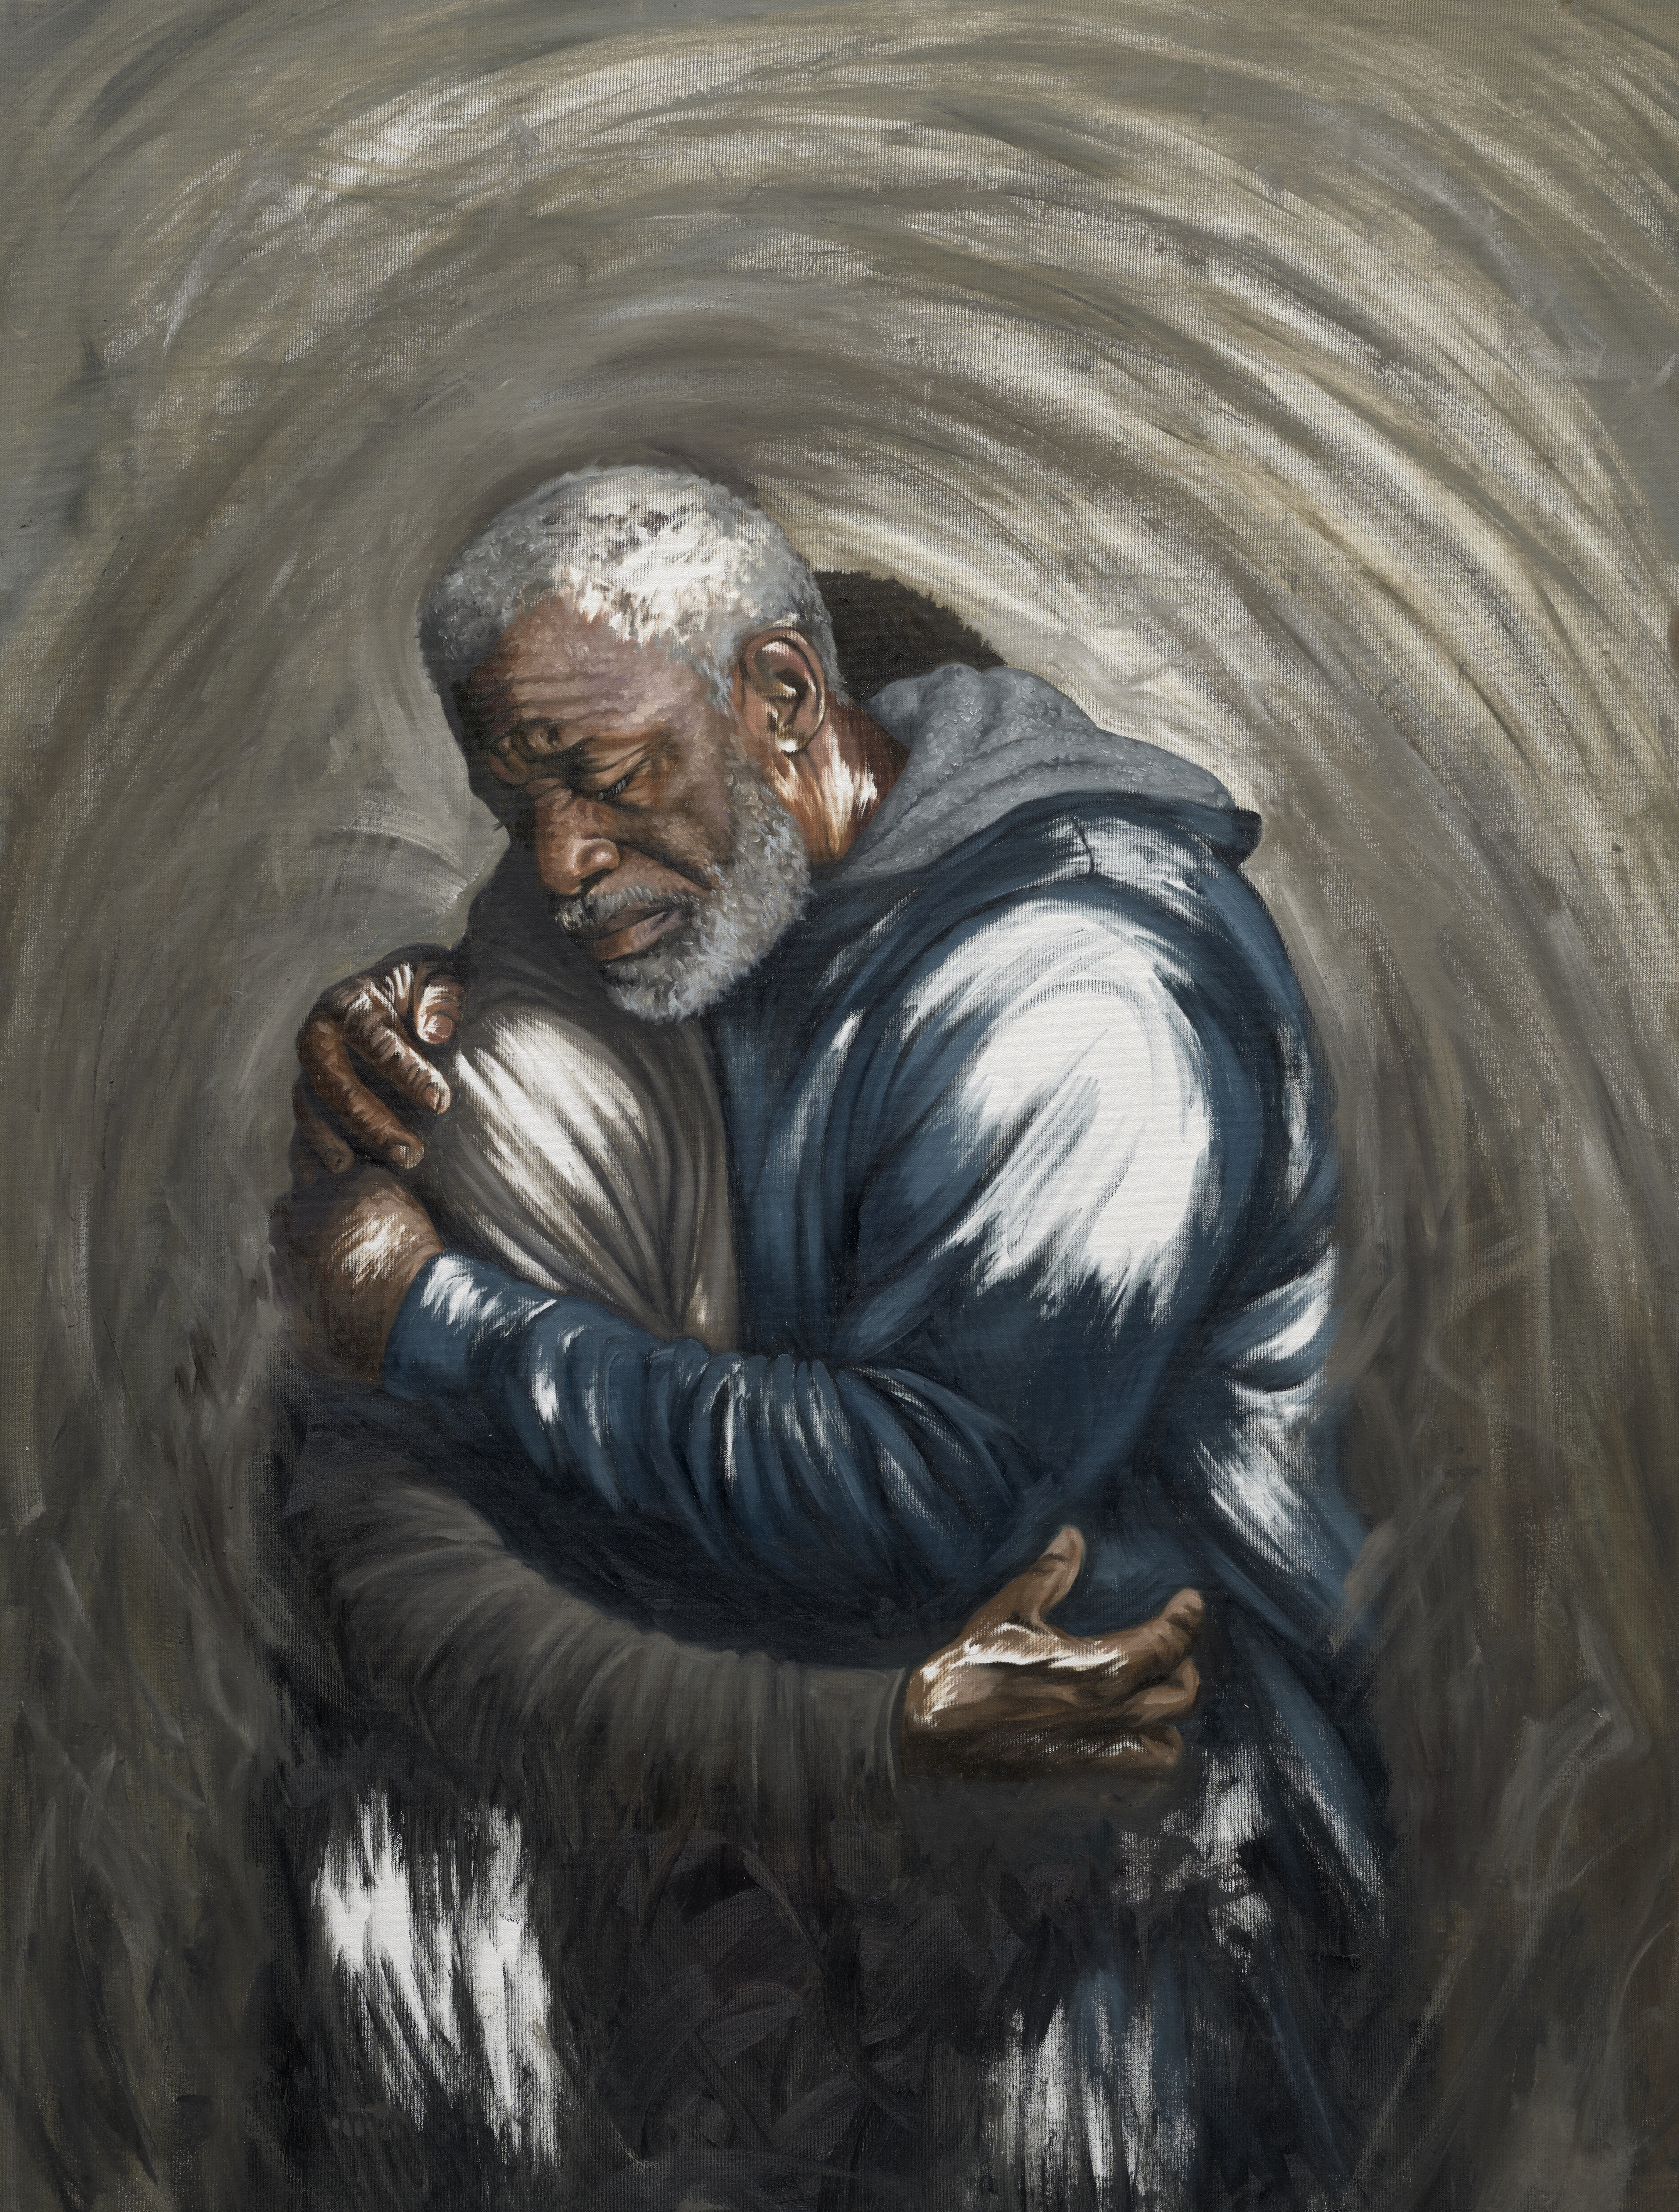 An oil painting of an embrace of two black men, the one more visible is older with grey hair and his eyes are closed